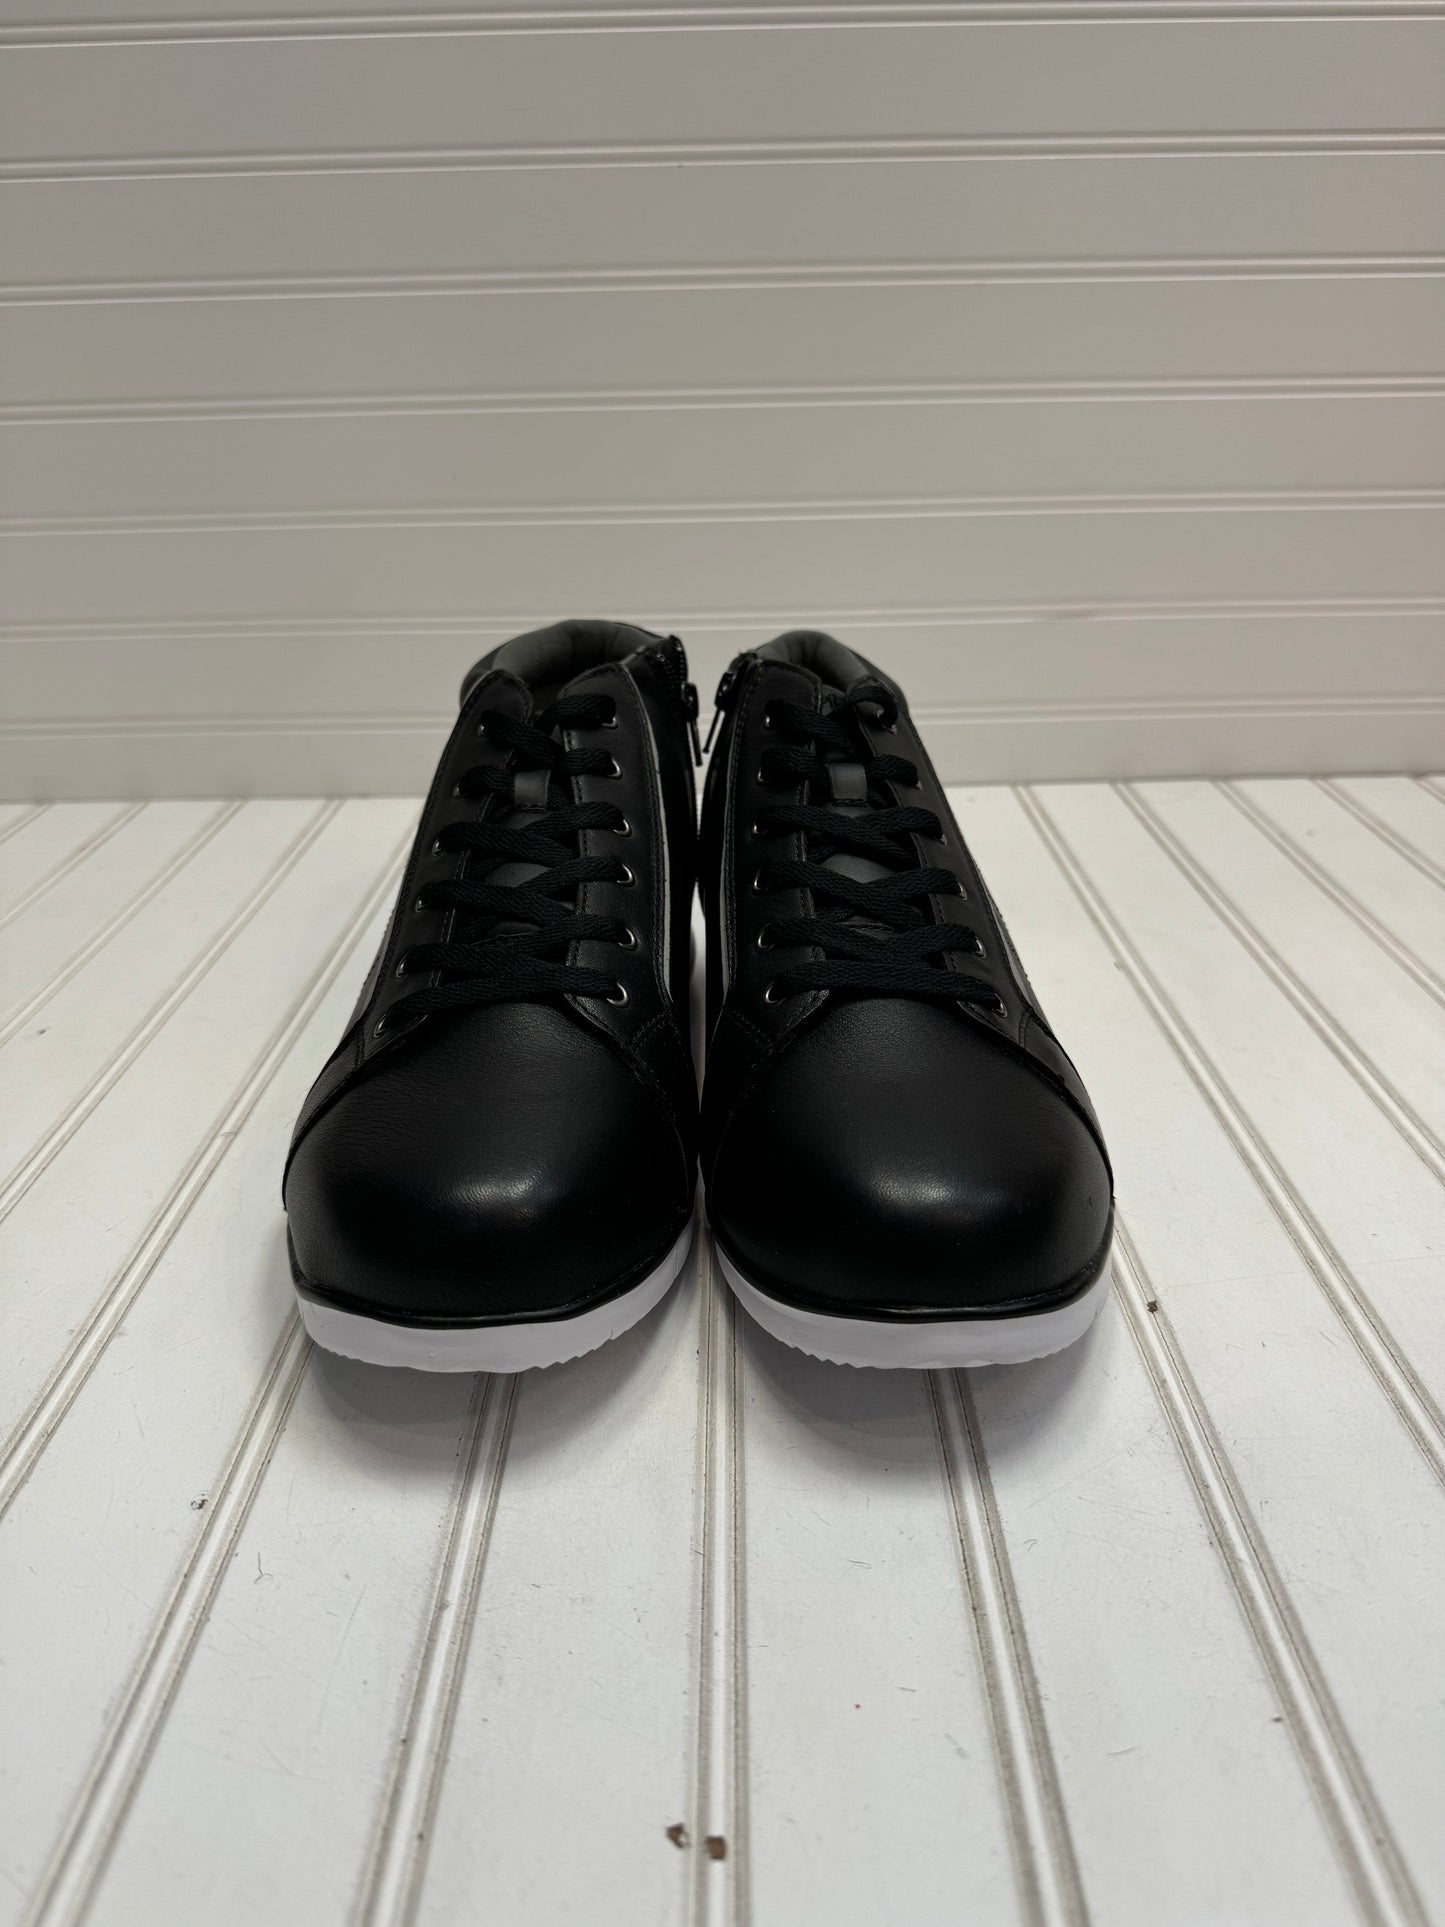 Black & White Shoes Sneakers Cmb, Size 10